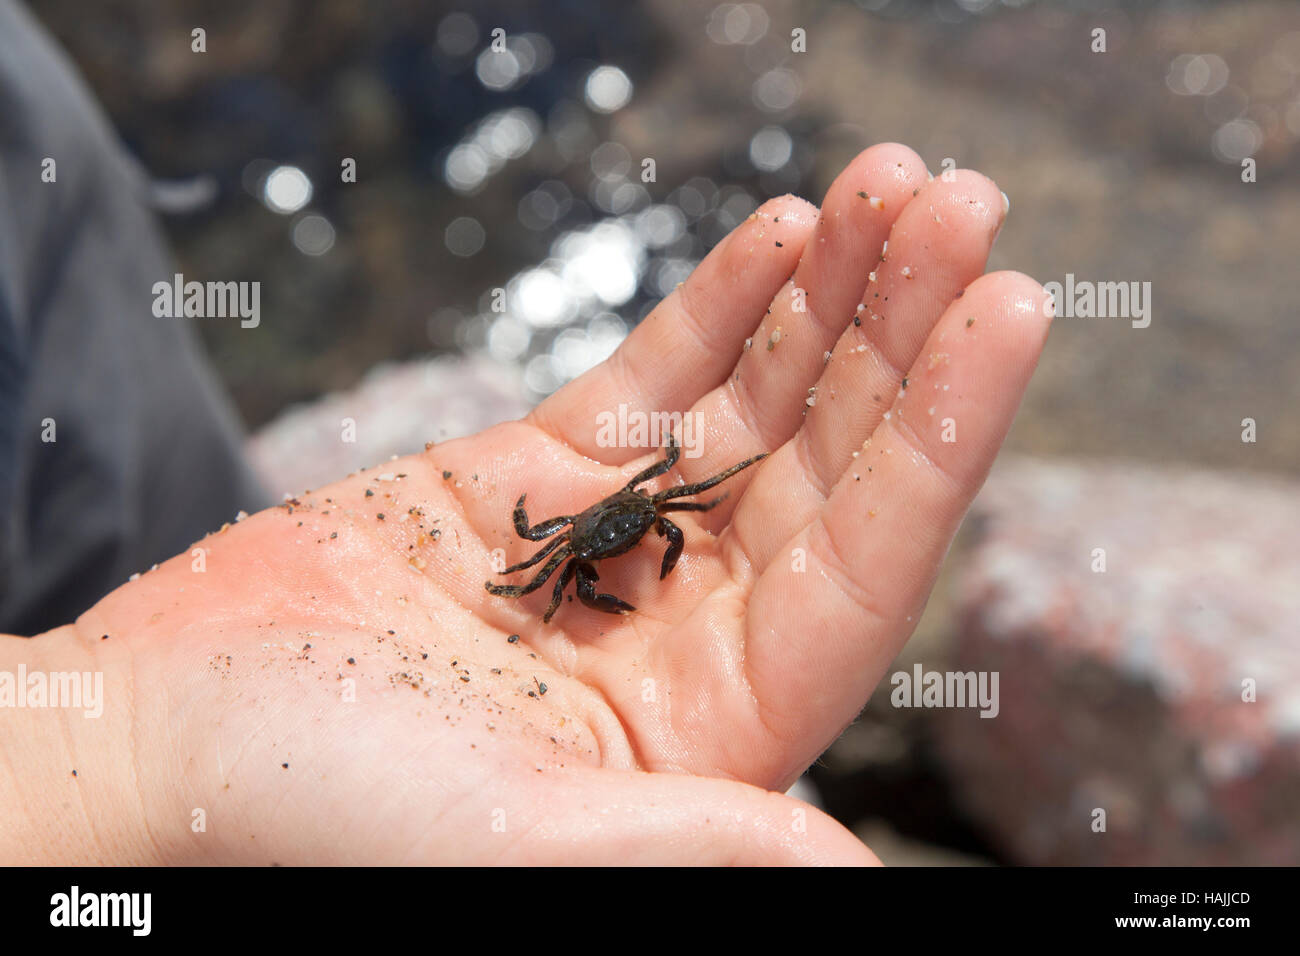 Small crab on child's hand Stock Photo